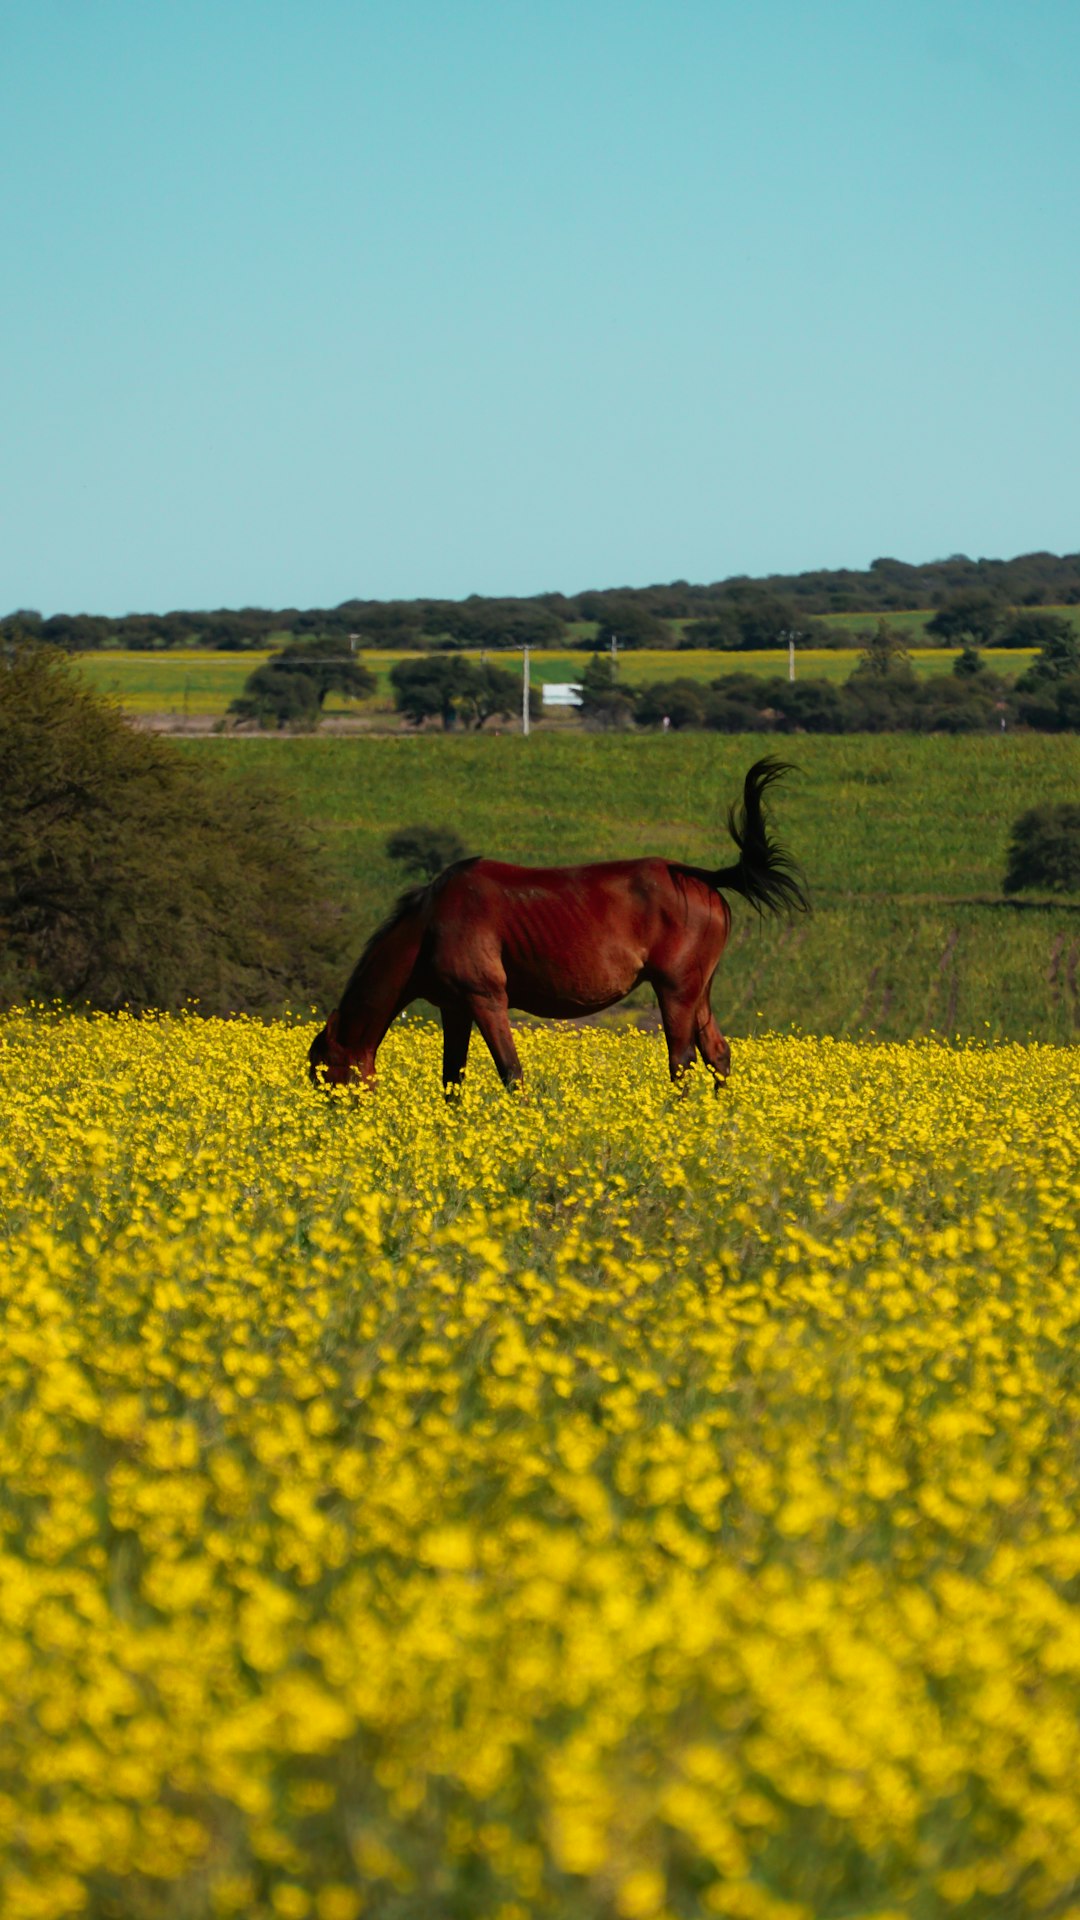 brown horse eating yellow flower field during daytime